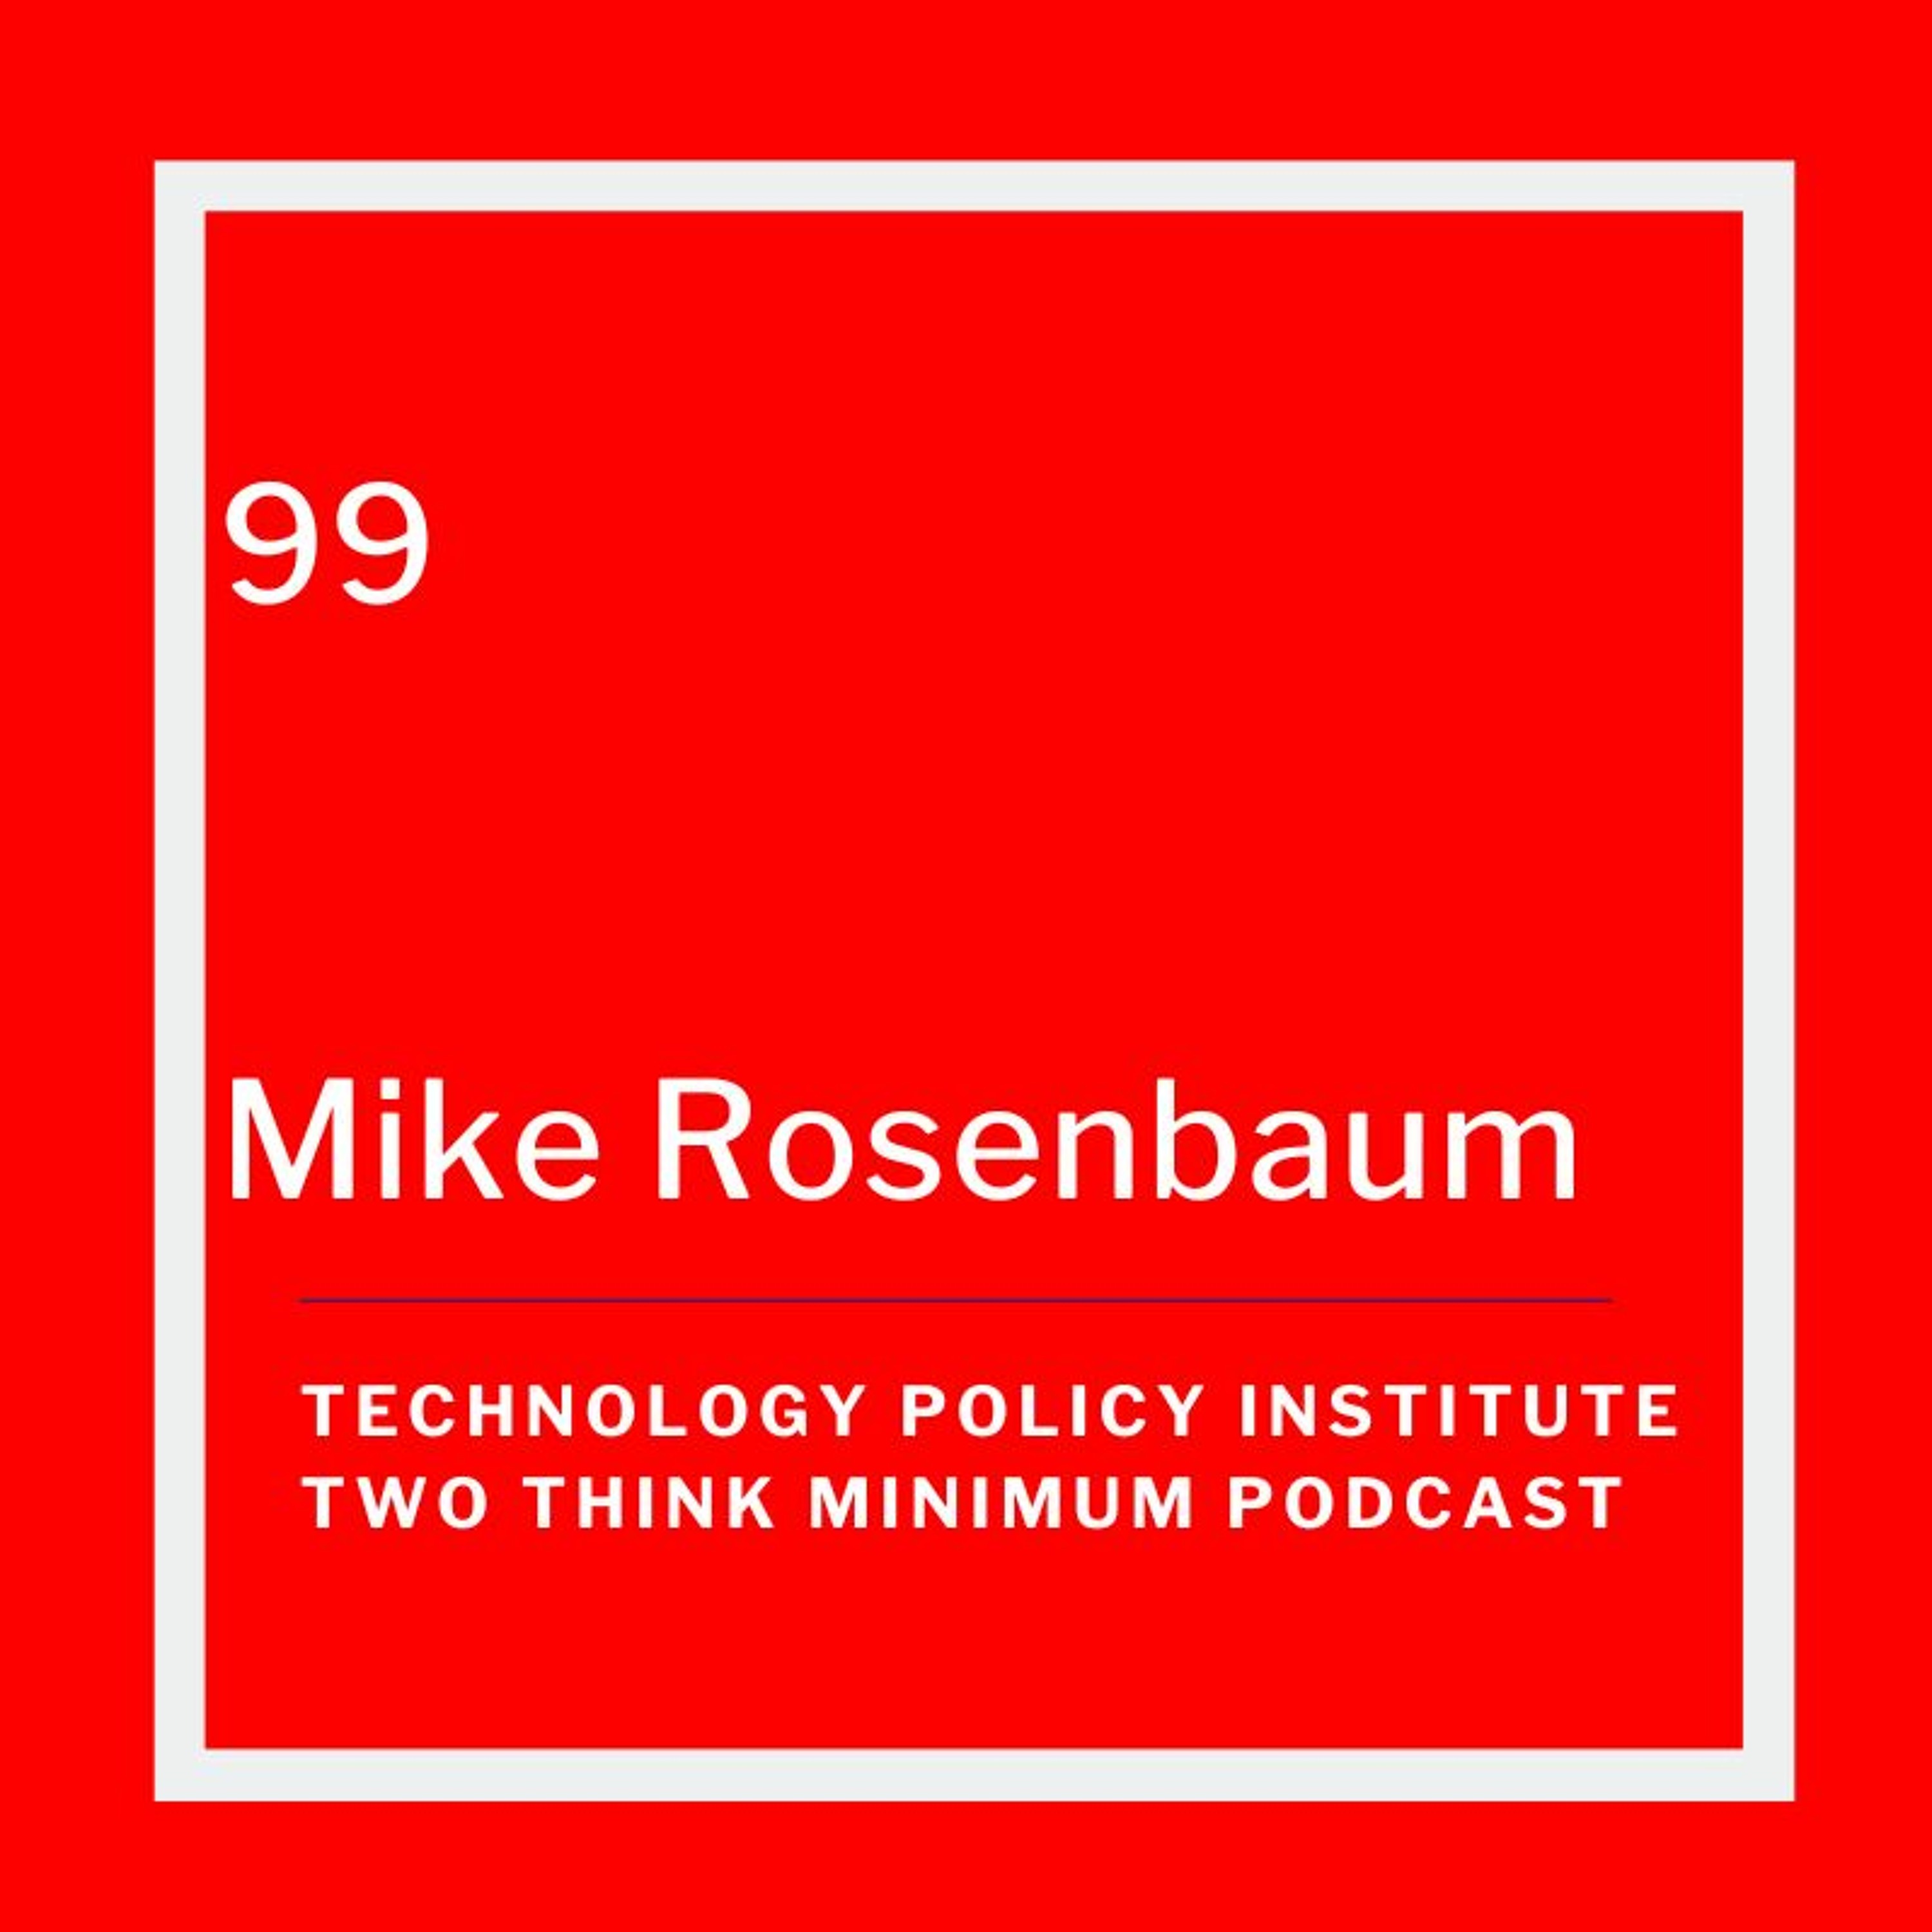 Mike Rosenbaum on Using AI to Avoid Hiring Biases and Find Overlooked Talent